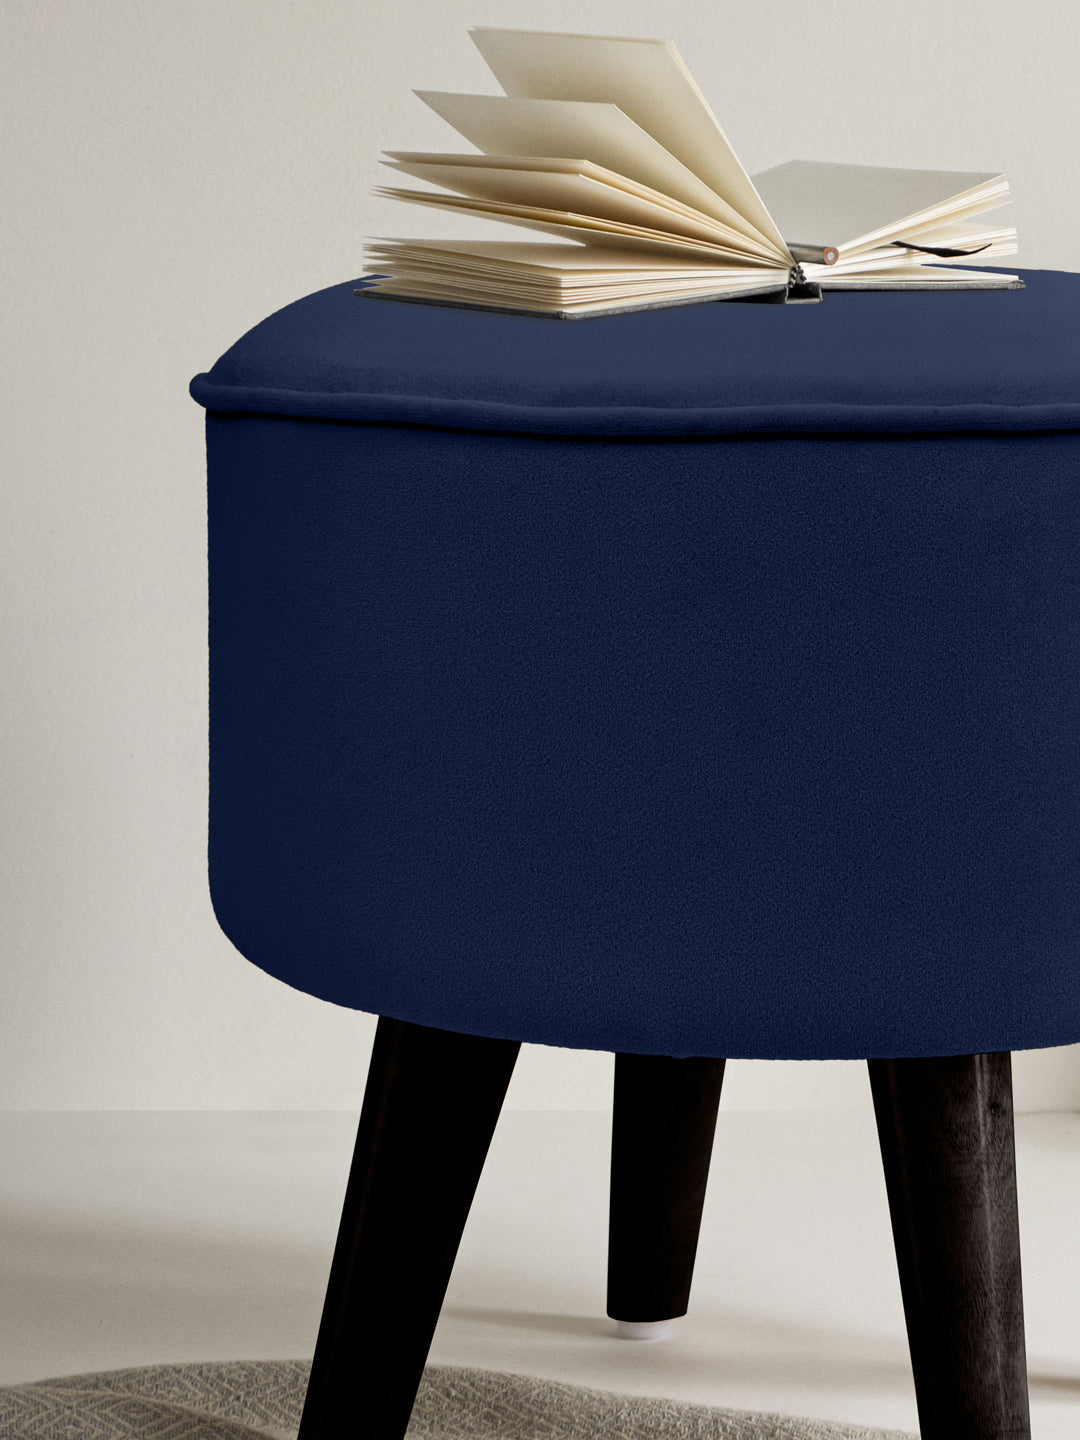 Resolution Blue Ottoman With Wooden Legs